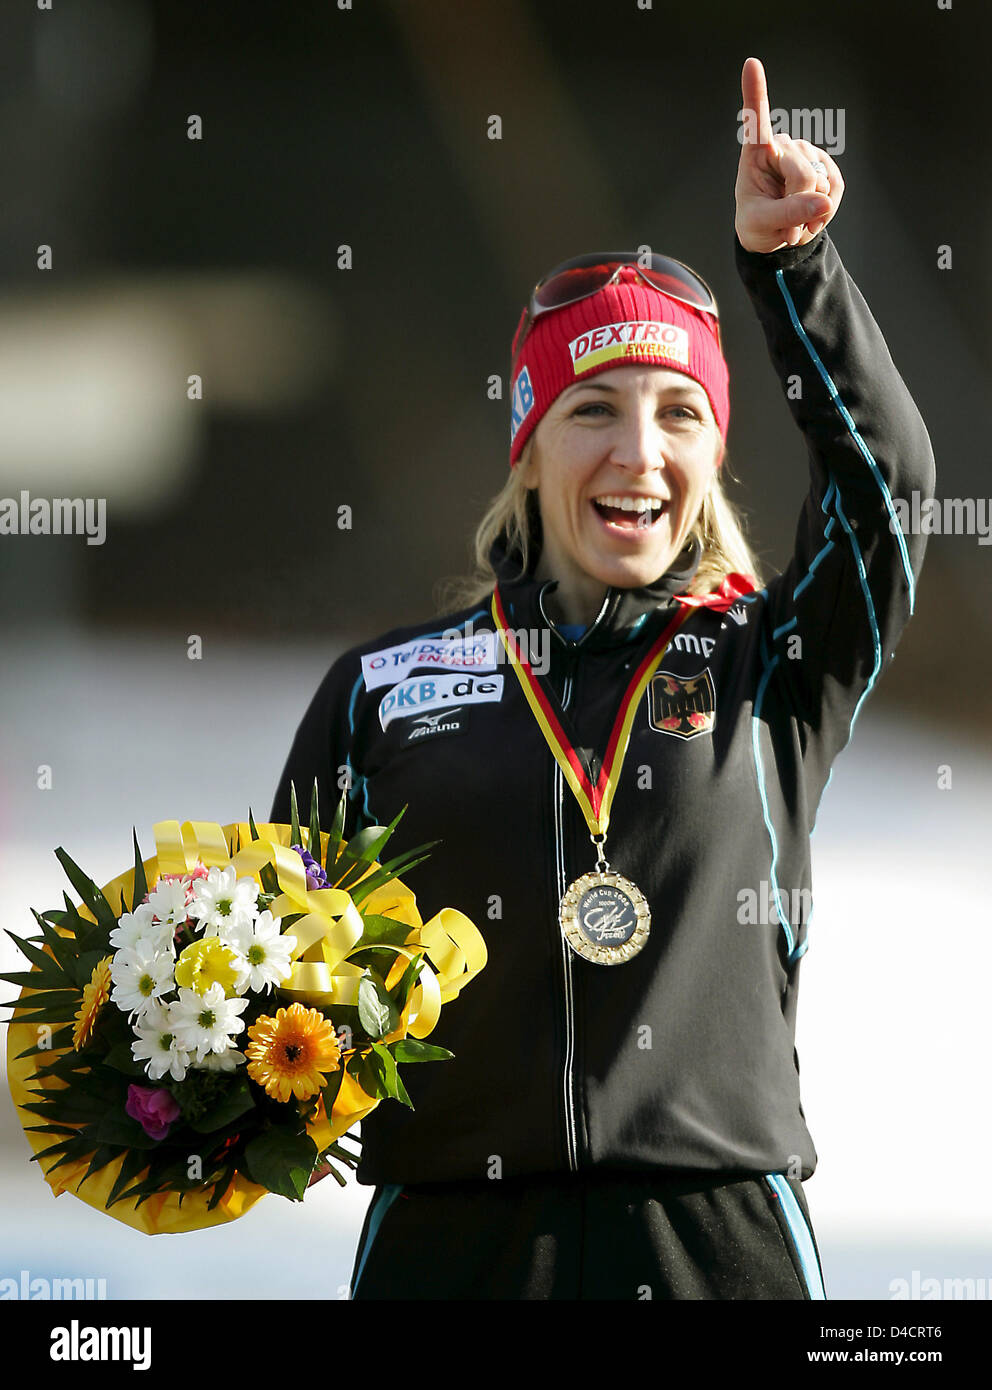 German Anni Friesinger celebrates her vistory in the 1000m competition at the Speed Skating Sprint World Cup in Inzell, southern Germany, 17 February 2008. 31 year-old Friesinger won her 54th World Cup race in 1:16,44 min. Photo: MATTHIAS SCHRADER Stock Photo